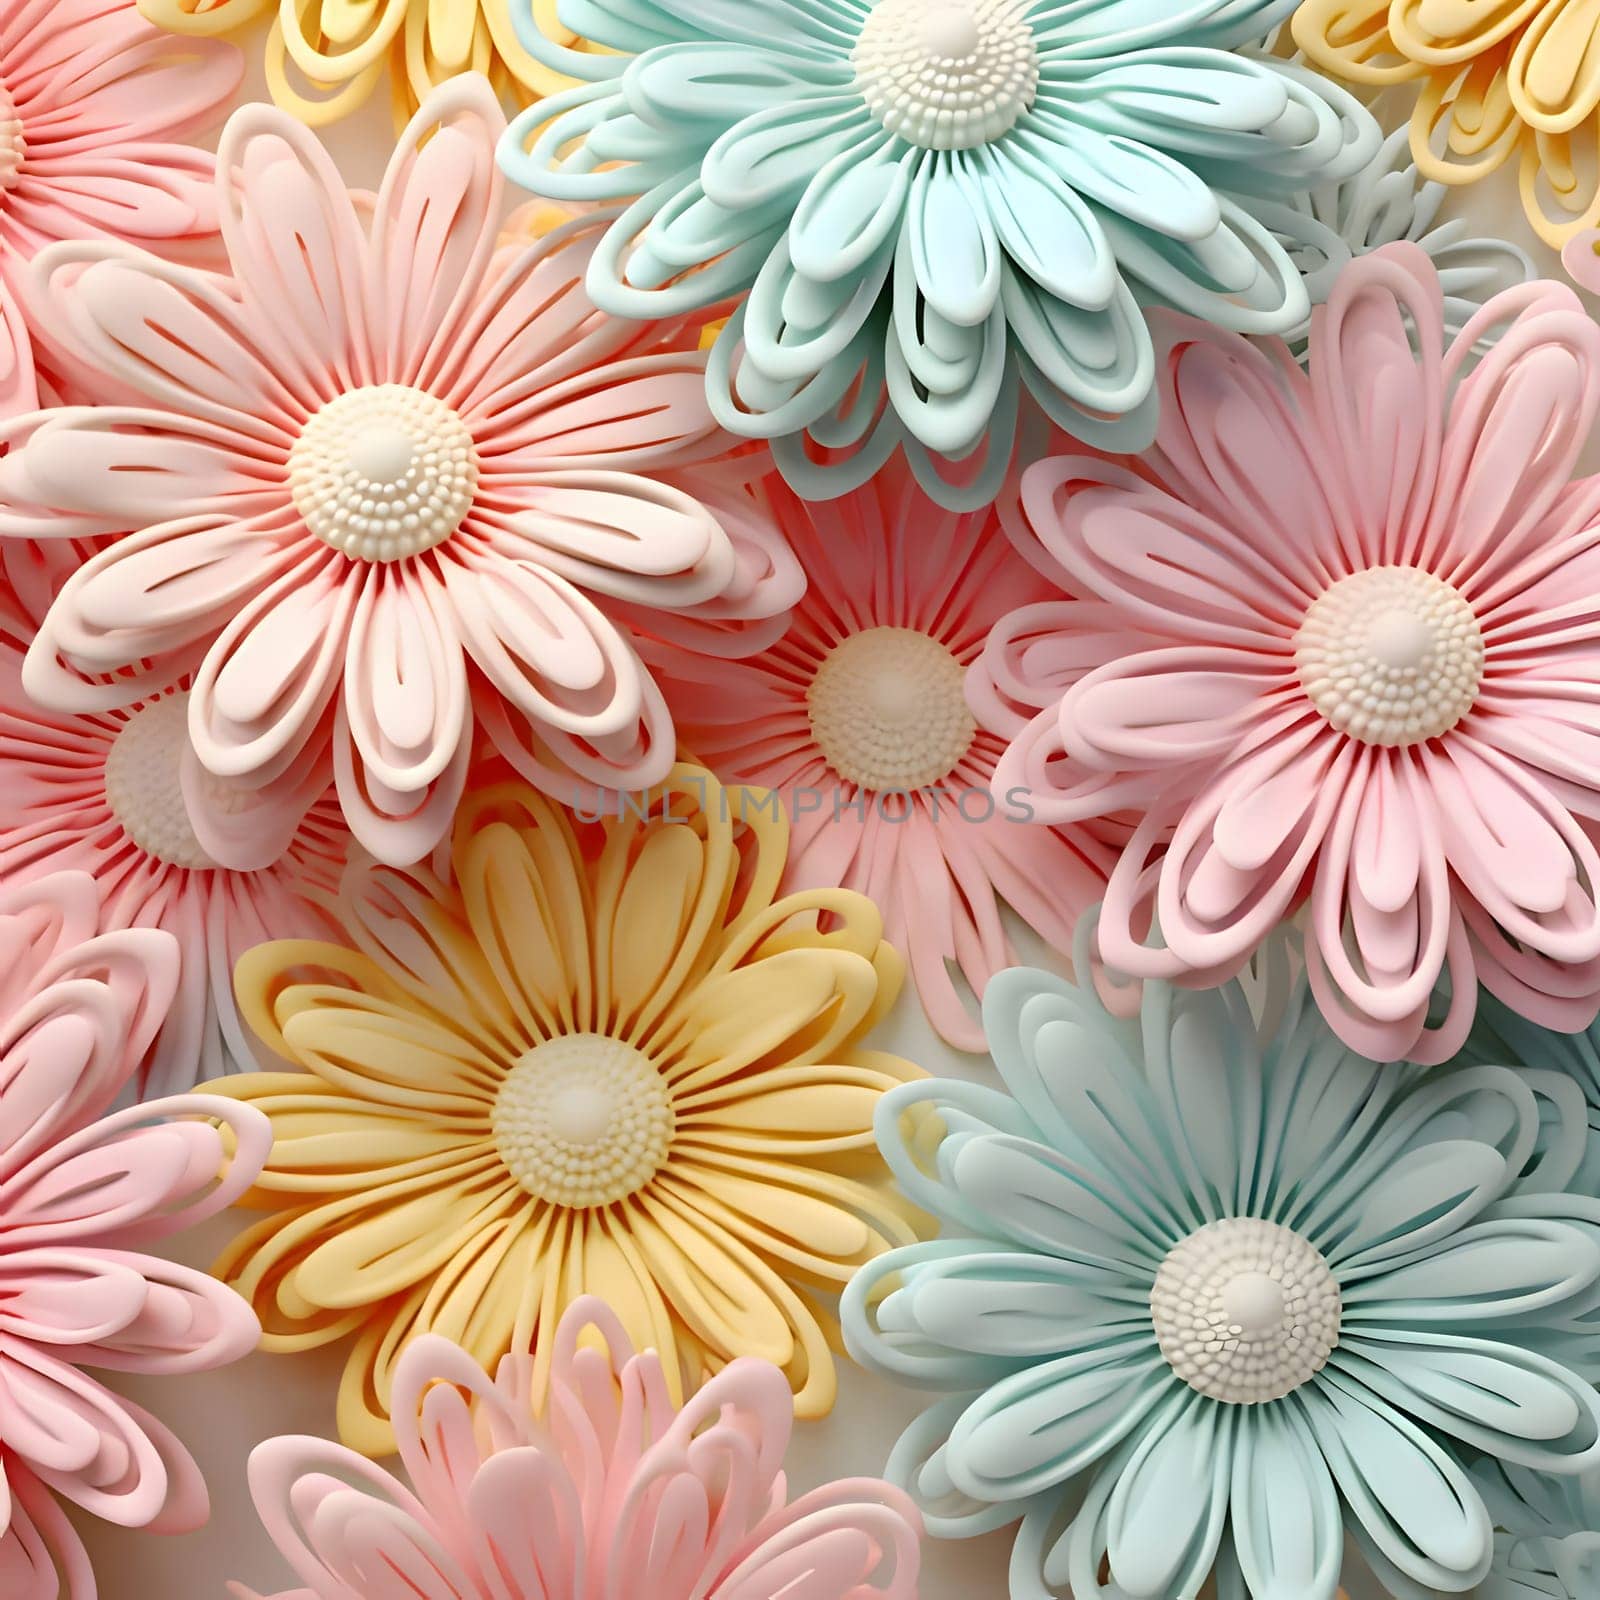 Patterns and banners backgrounds: Beautiful multicolored daisies background. 3d rendering